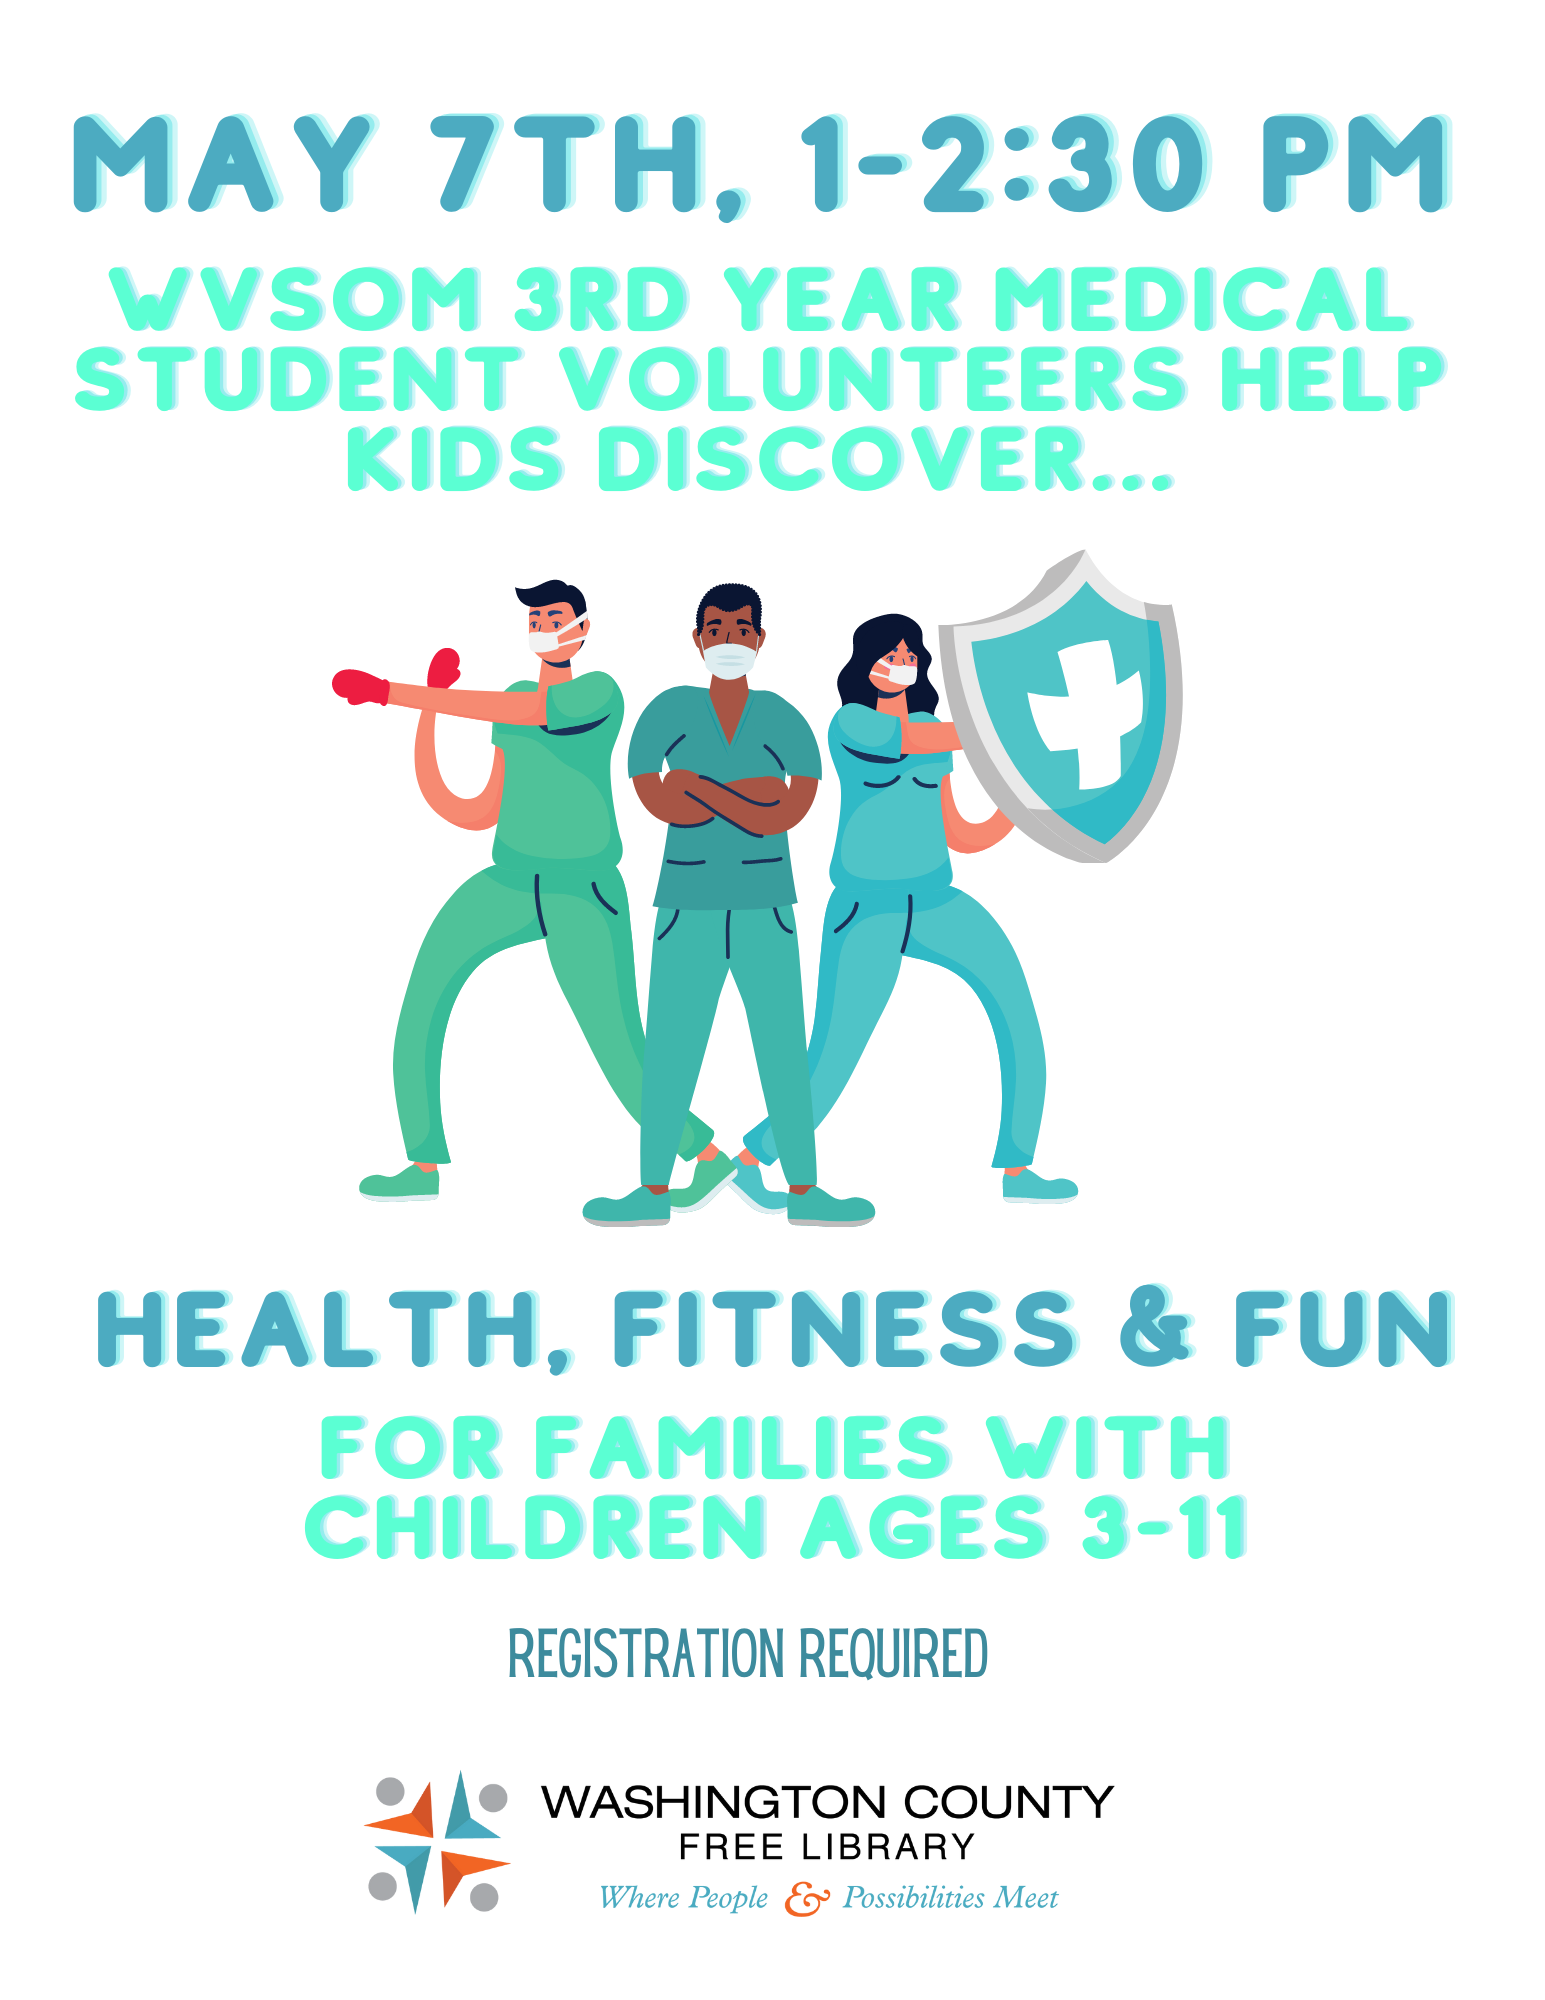 WVSOM Medical Students Help Kids Discover Health, Fitness and Fun!